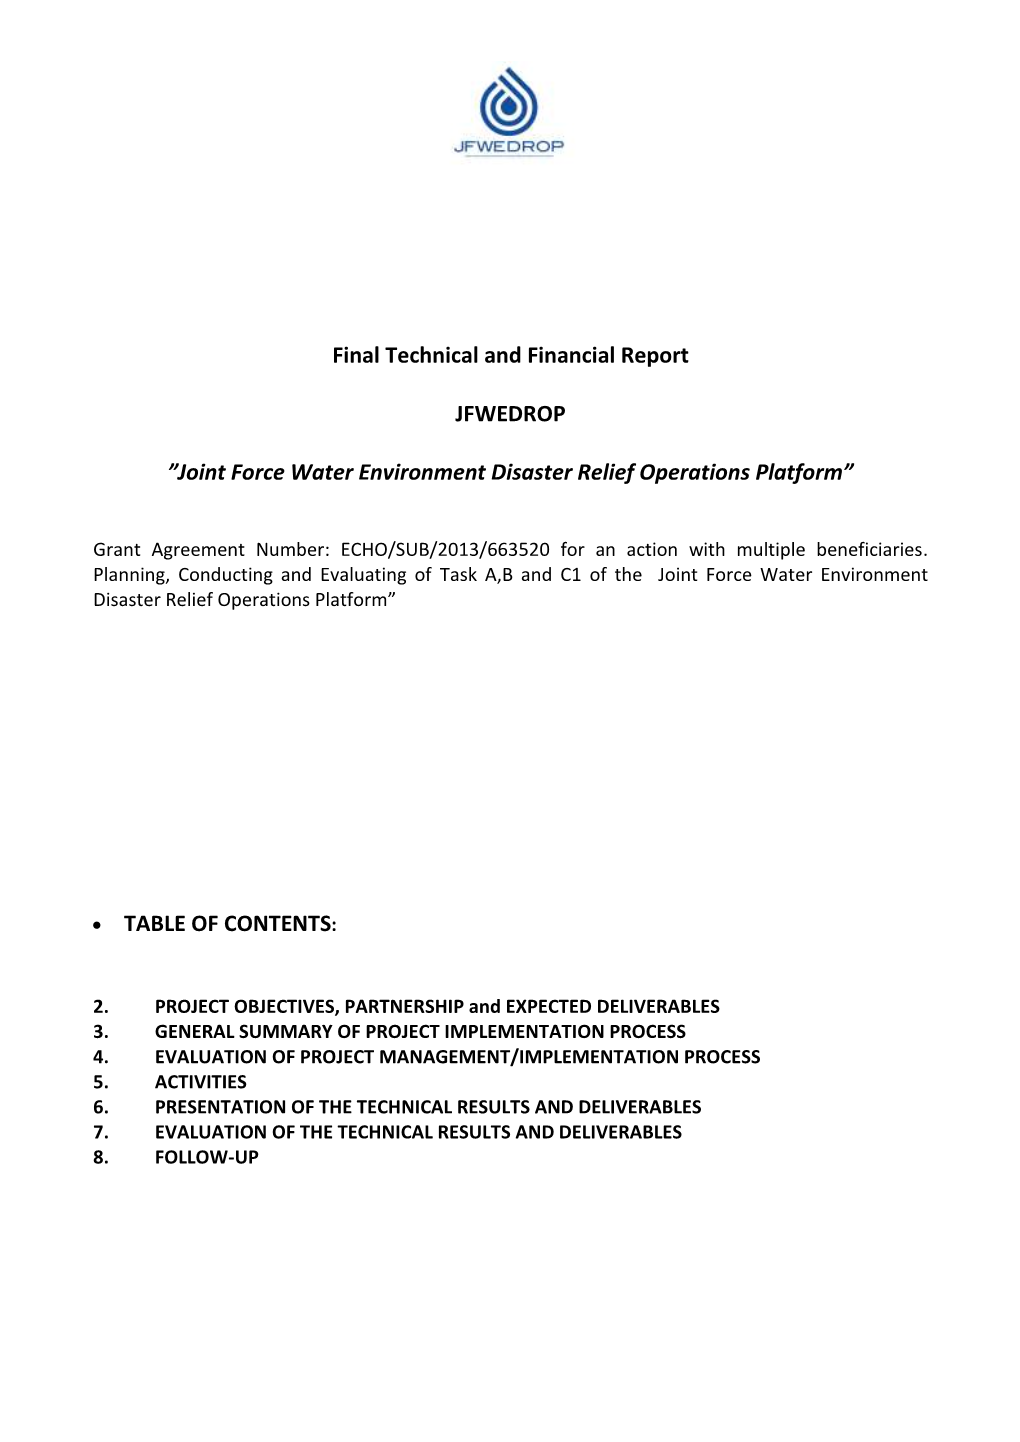 Final Technical and Financial Report JFWEDROP ”Joint Force Water Environment Disaster Relief Operations Platform”